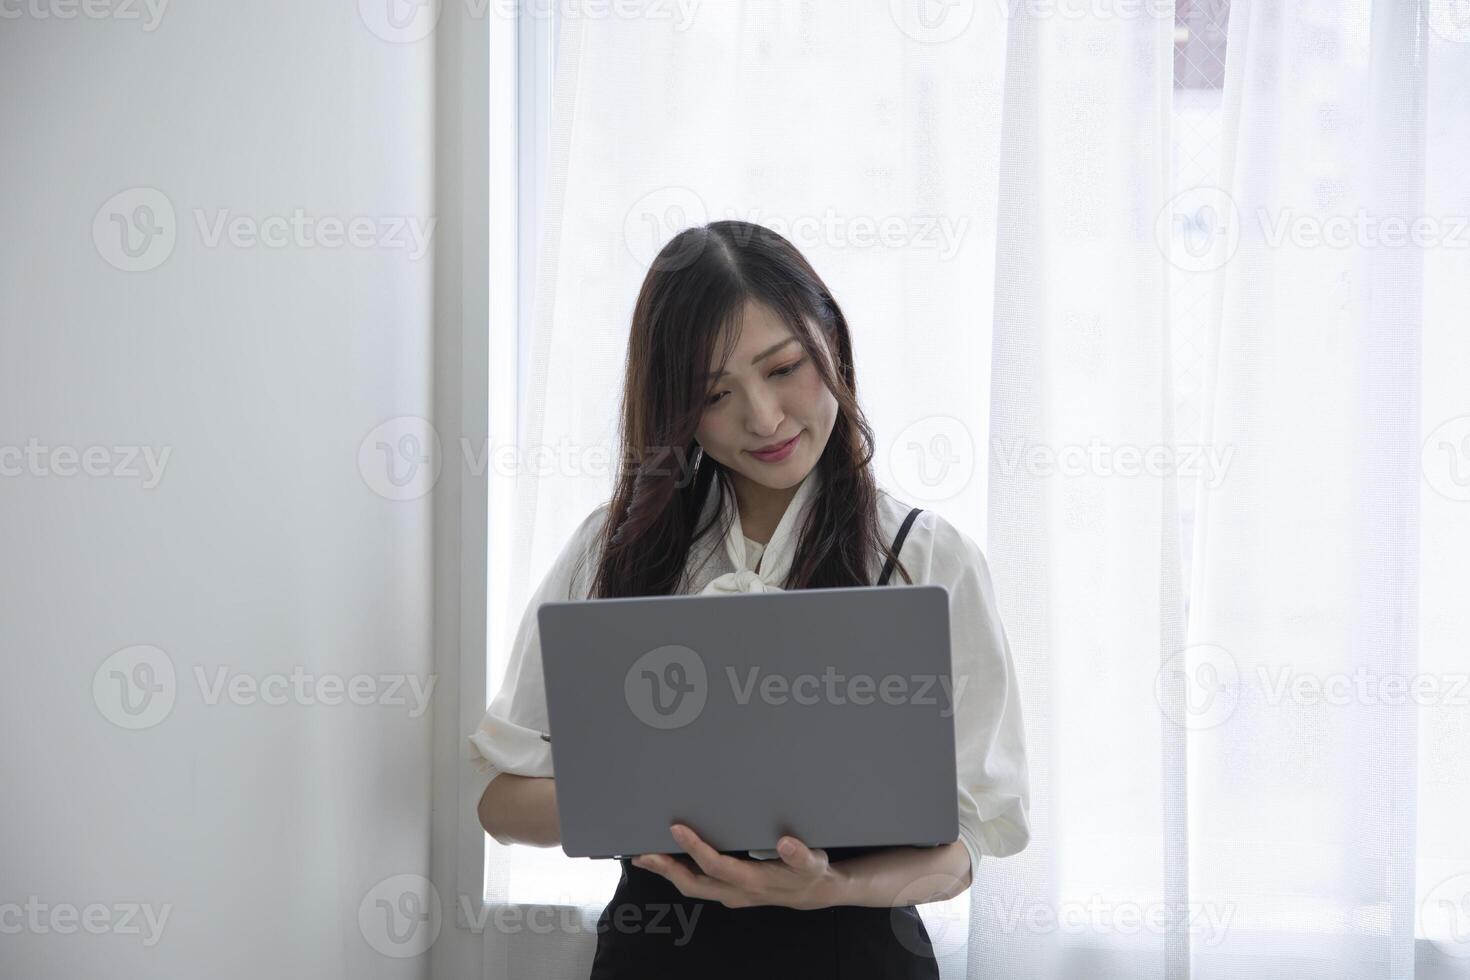 A working Japanese woman by remote work in the home office closeup photo